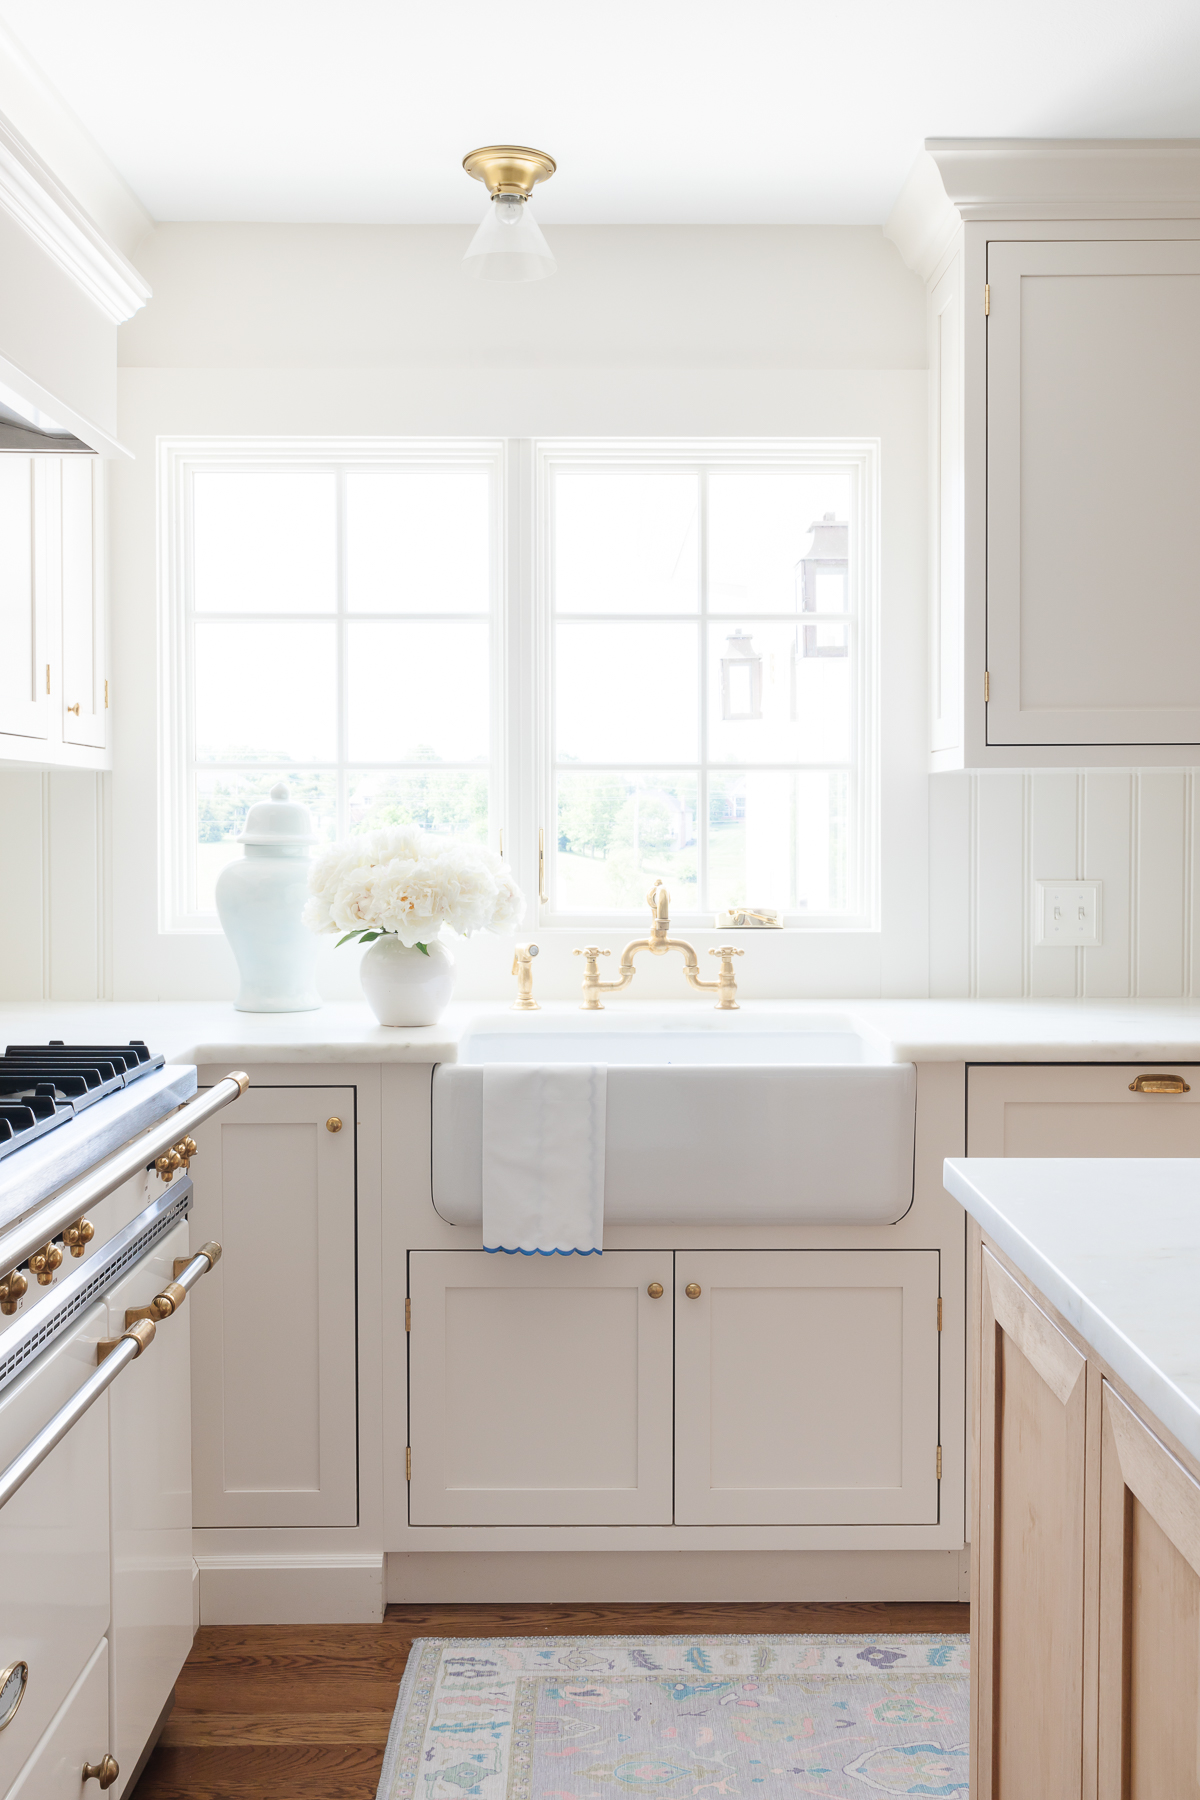 A minimalist kitchen with cream cabinets, marble countertops and a French range.